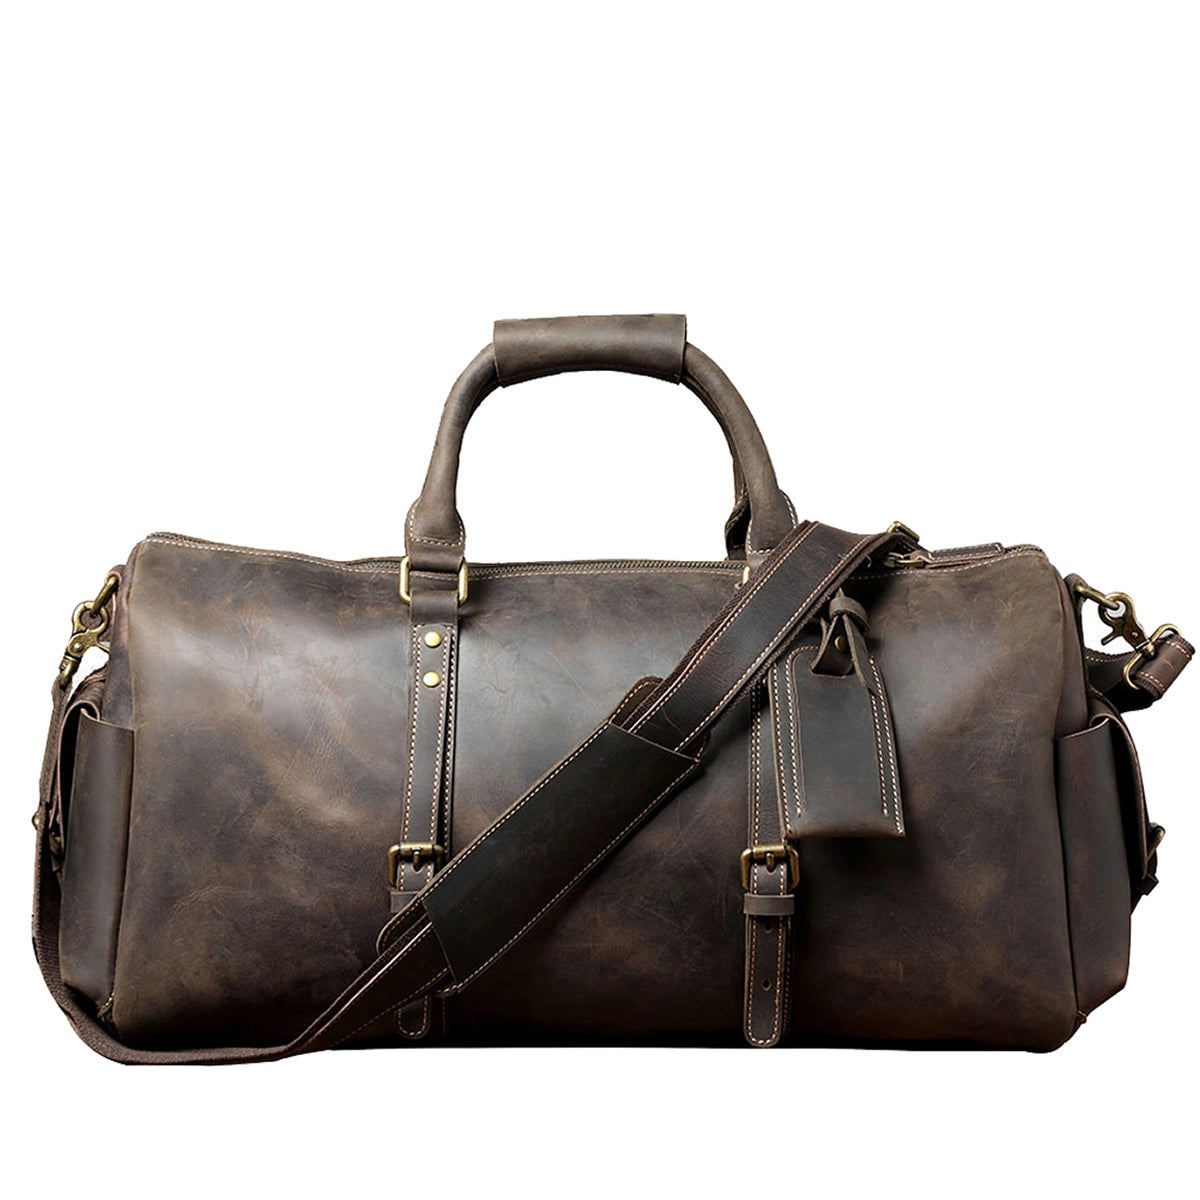 front view of a leather travel duffle bag, brown color